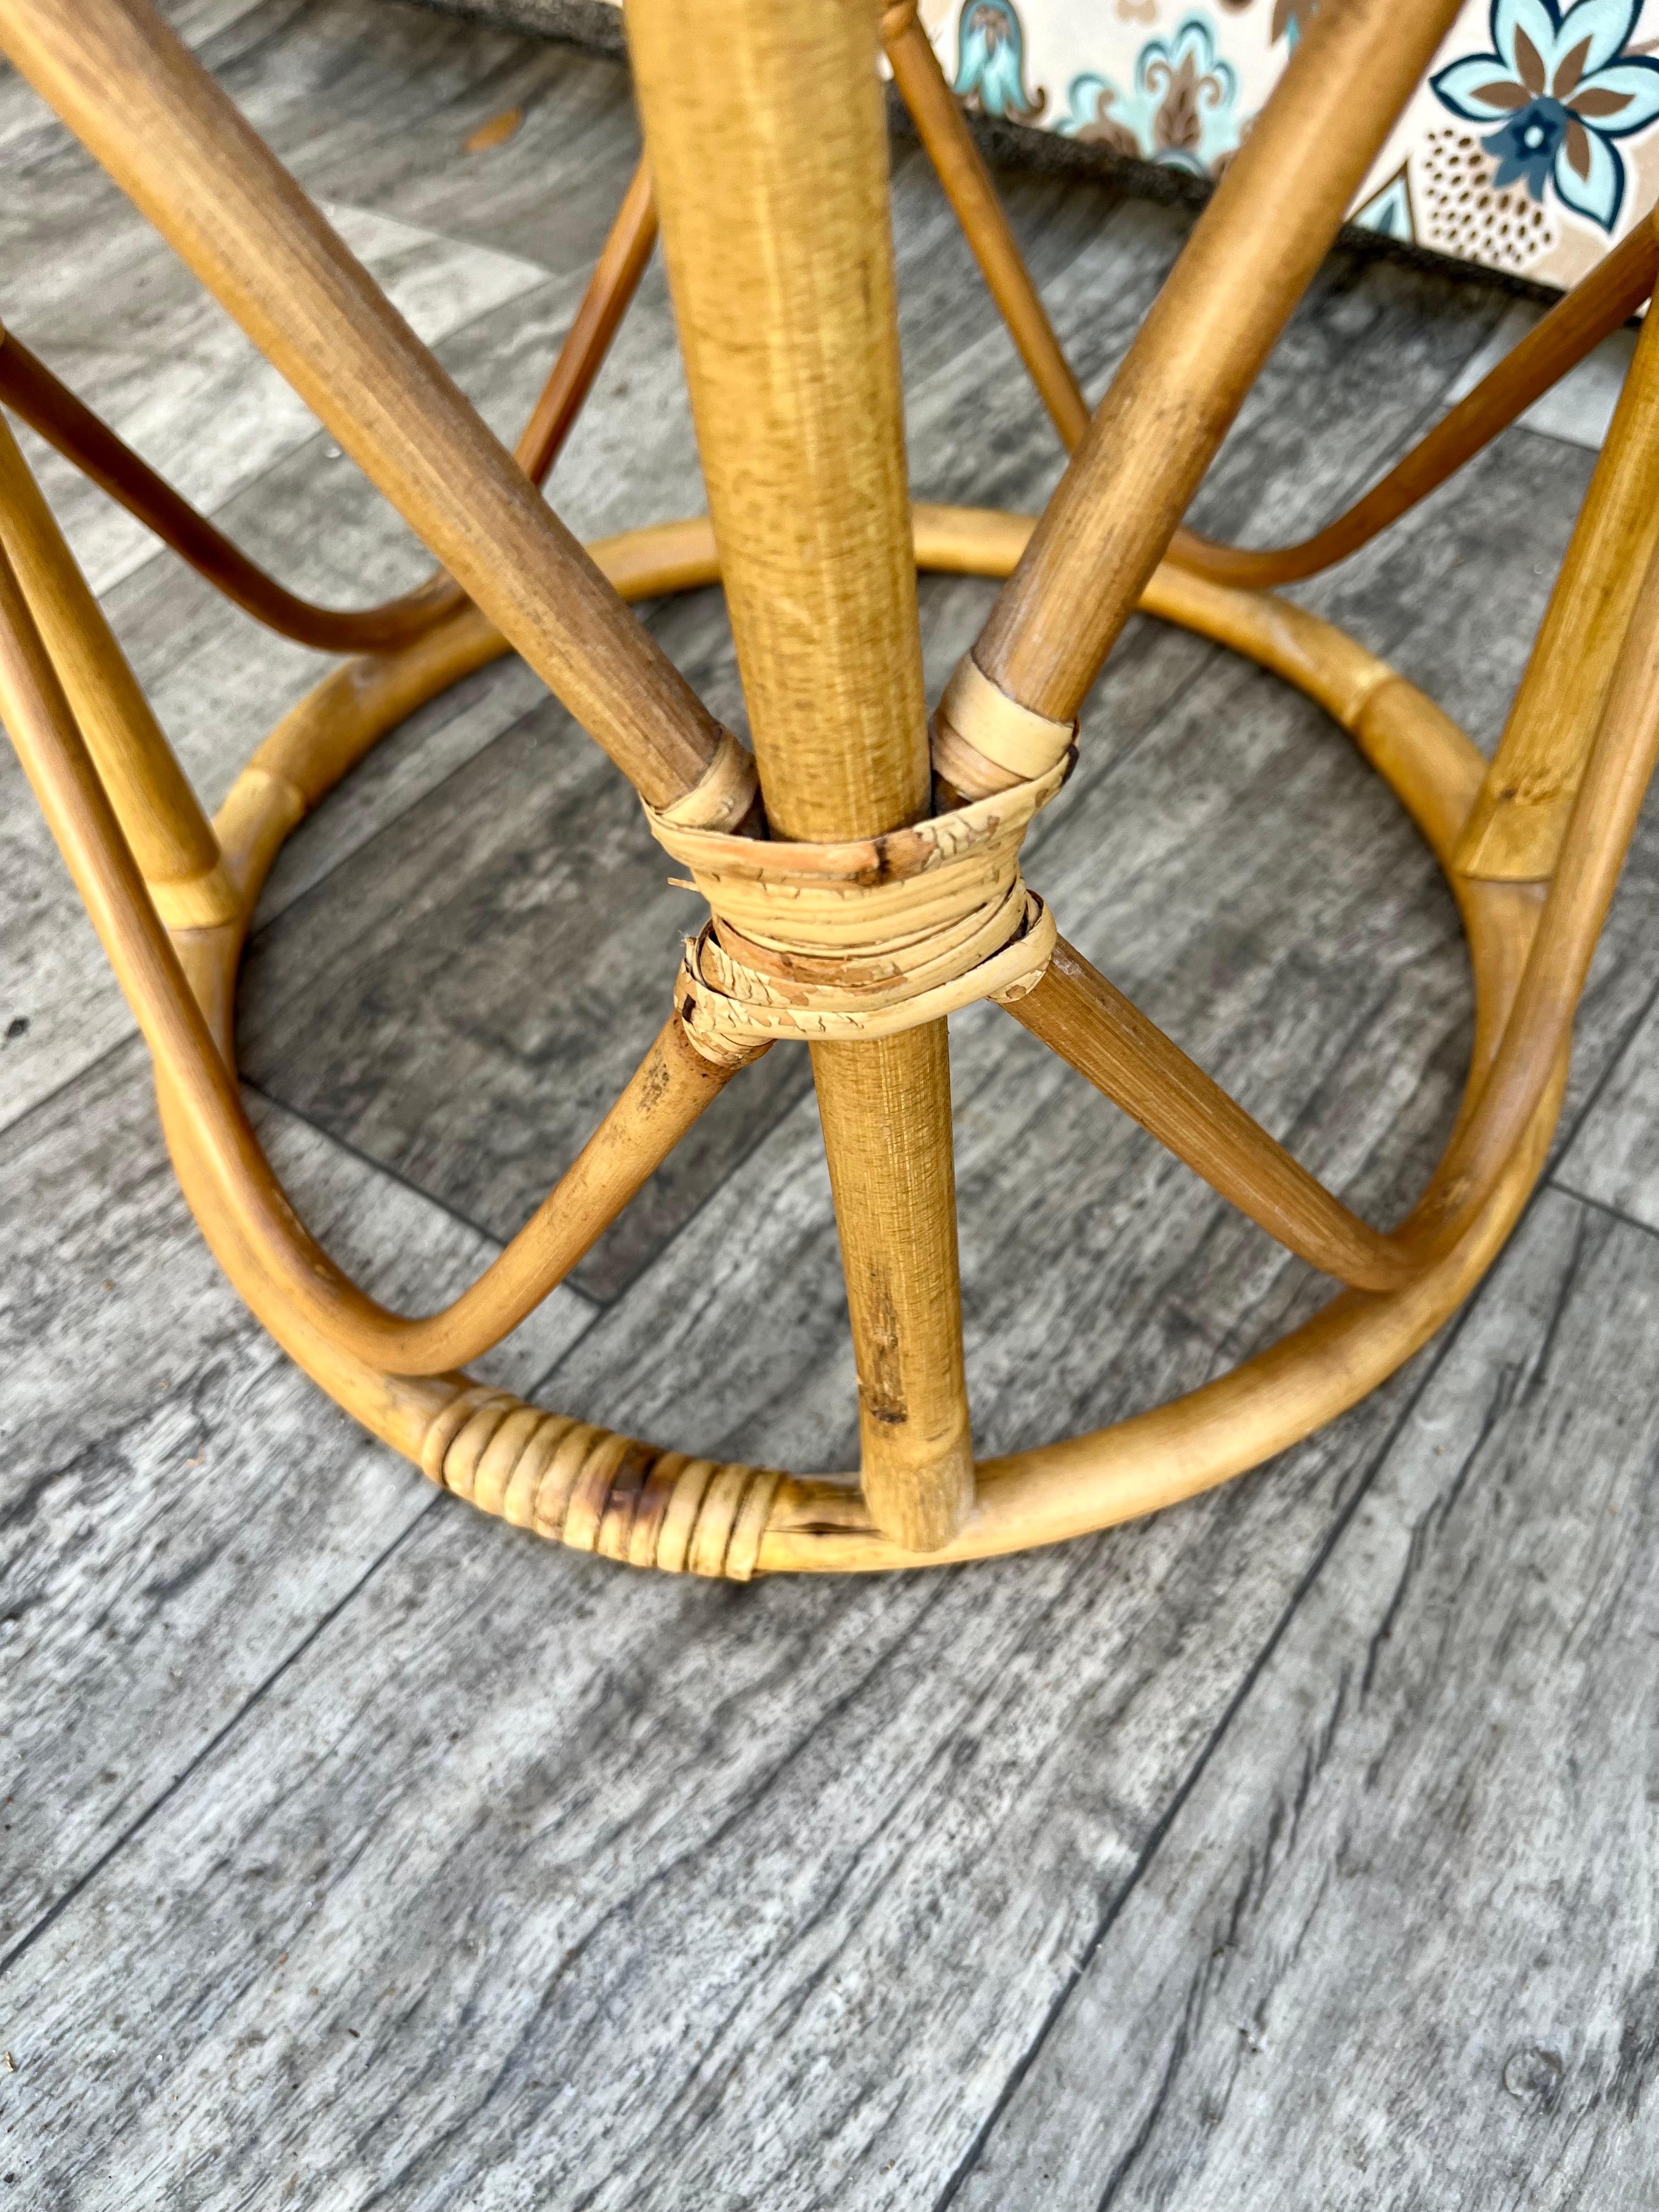 Coastal Style Bamboo and Rattan Round Side Table / Plant Stand. Circa 1970s  For Sale 9